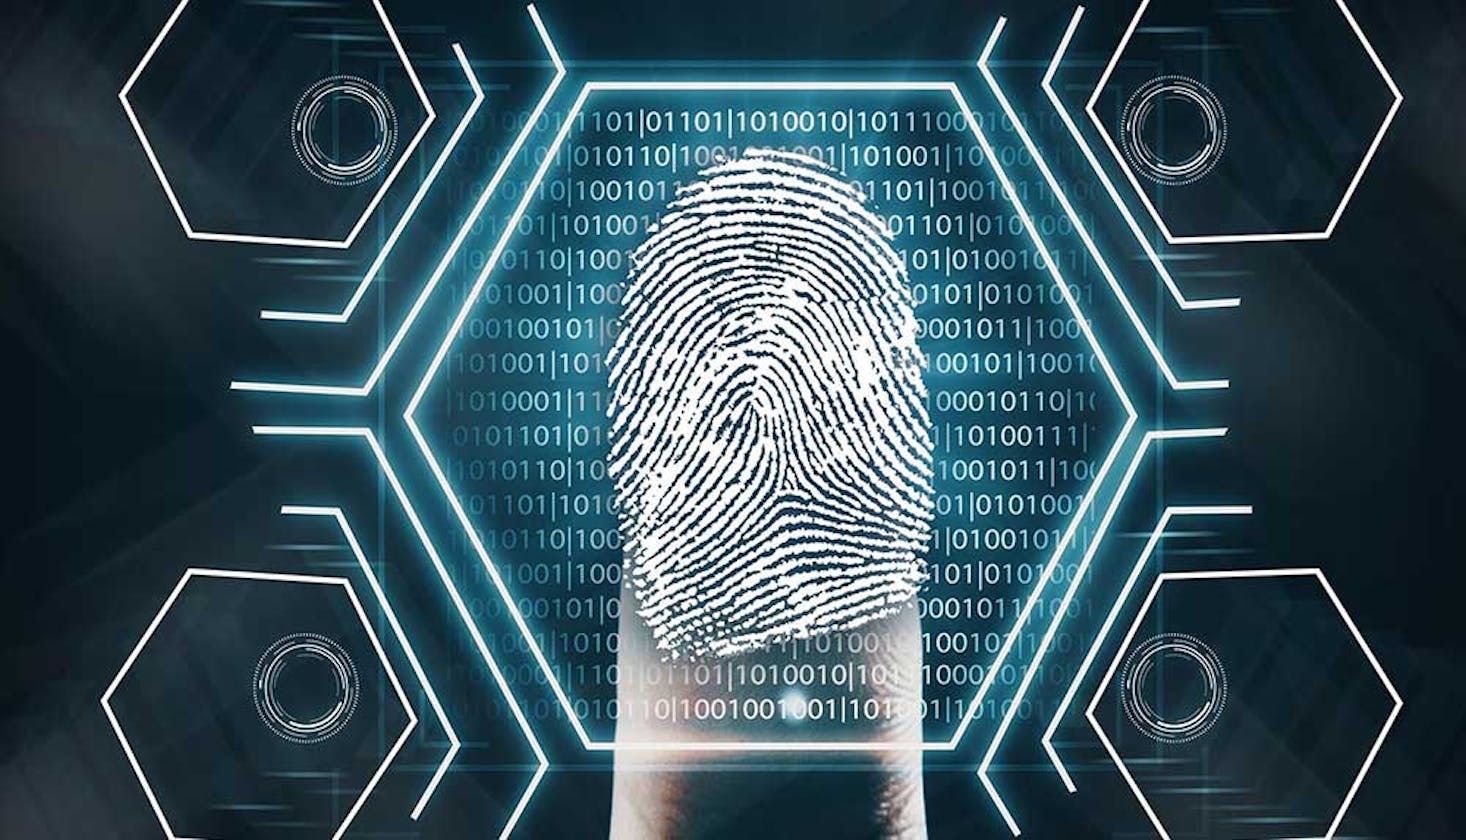 Biometric Authentication in Network Security